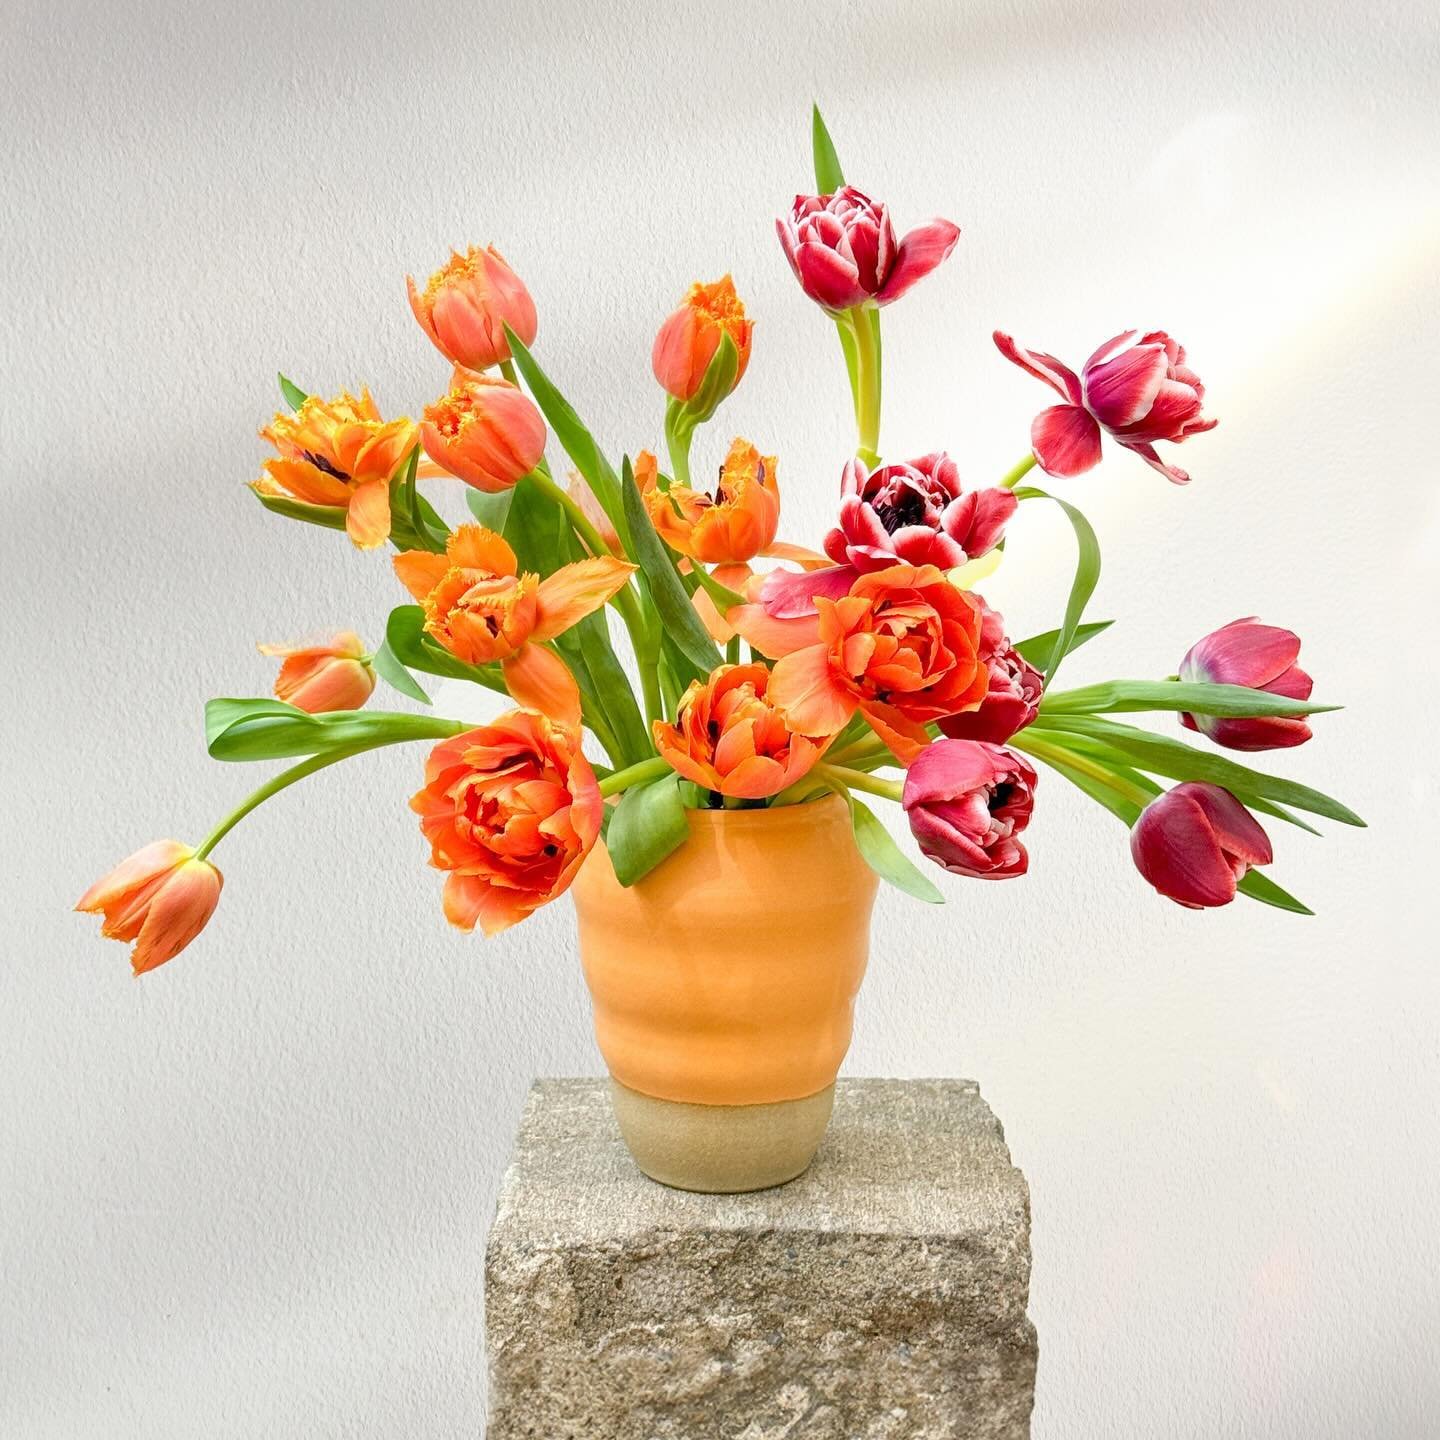 BREAKUP WITH 1-800-F*****S! 

Our Local Love arrangement is exclusive for #MothersDay, featuring tulips from @northerly.flora paired with a handcrafted ceramic vase by local artist @sandwich_ceramic. Moms love when you keep it close to home. 

#Minne